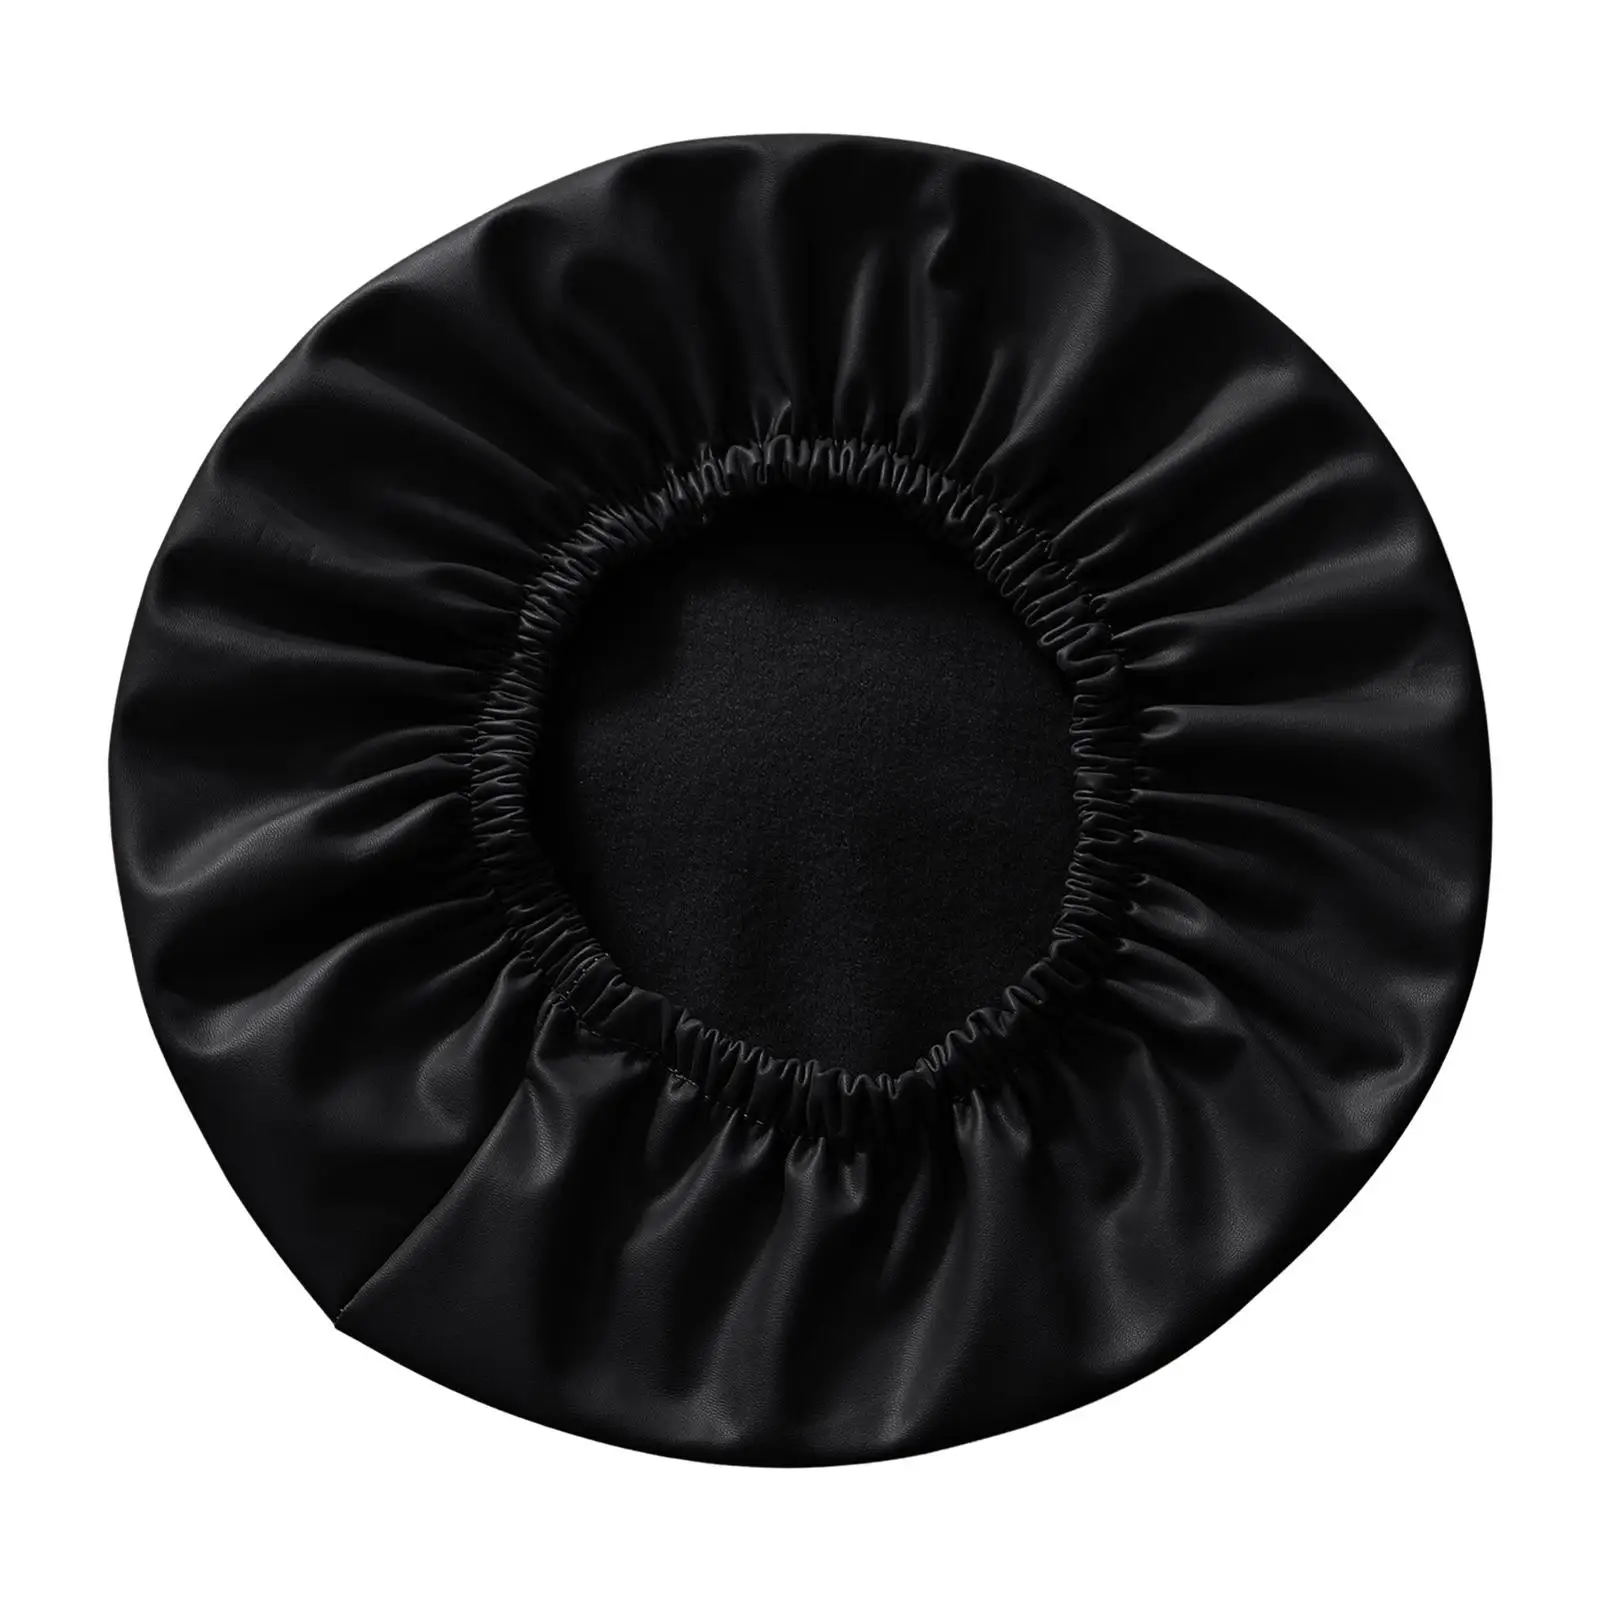 Elastic PU Leather Round Stool Chair Cover Waterproof Pump Chair Protector Bar Salon Small Round Seat Cushion Sleeve(no chair)